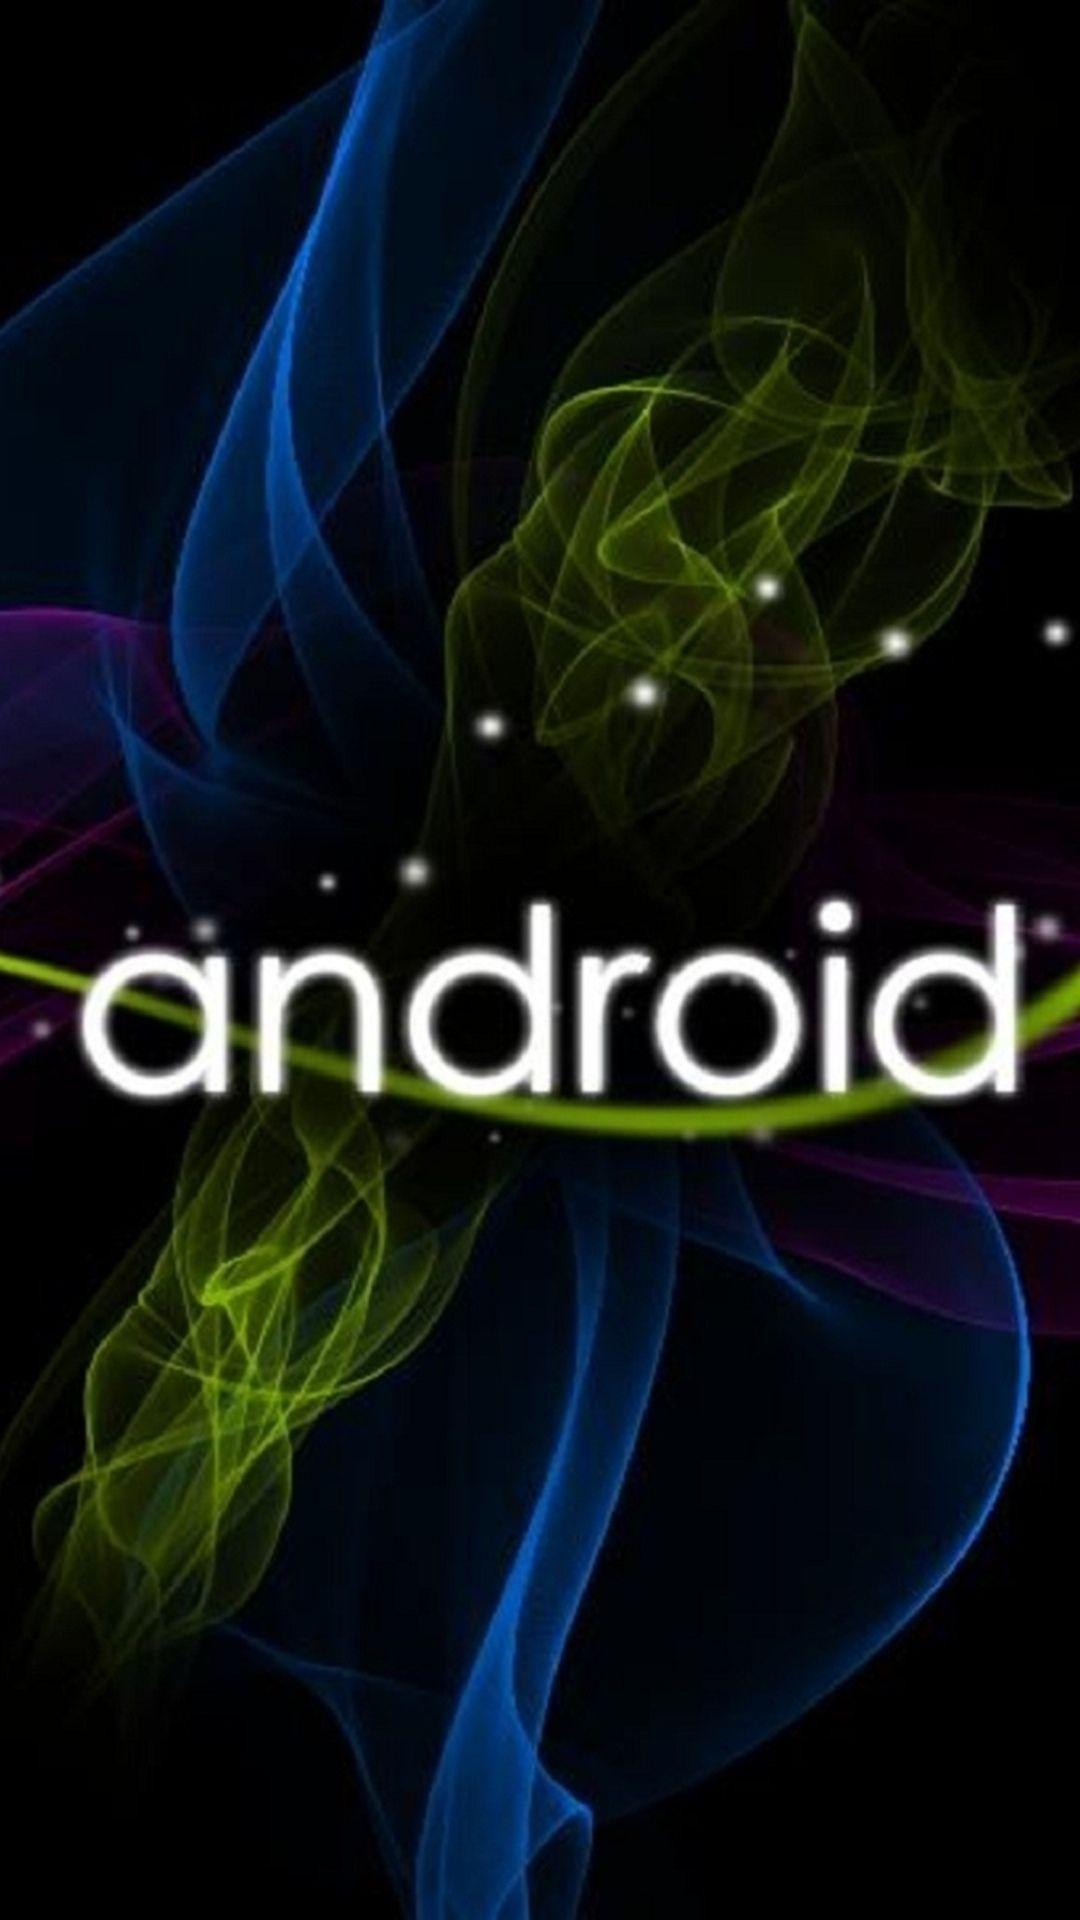 Many variations of wallpaper with android logo